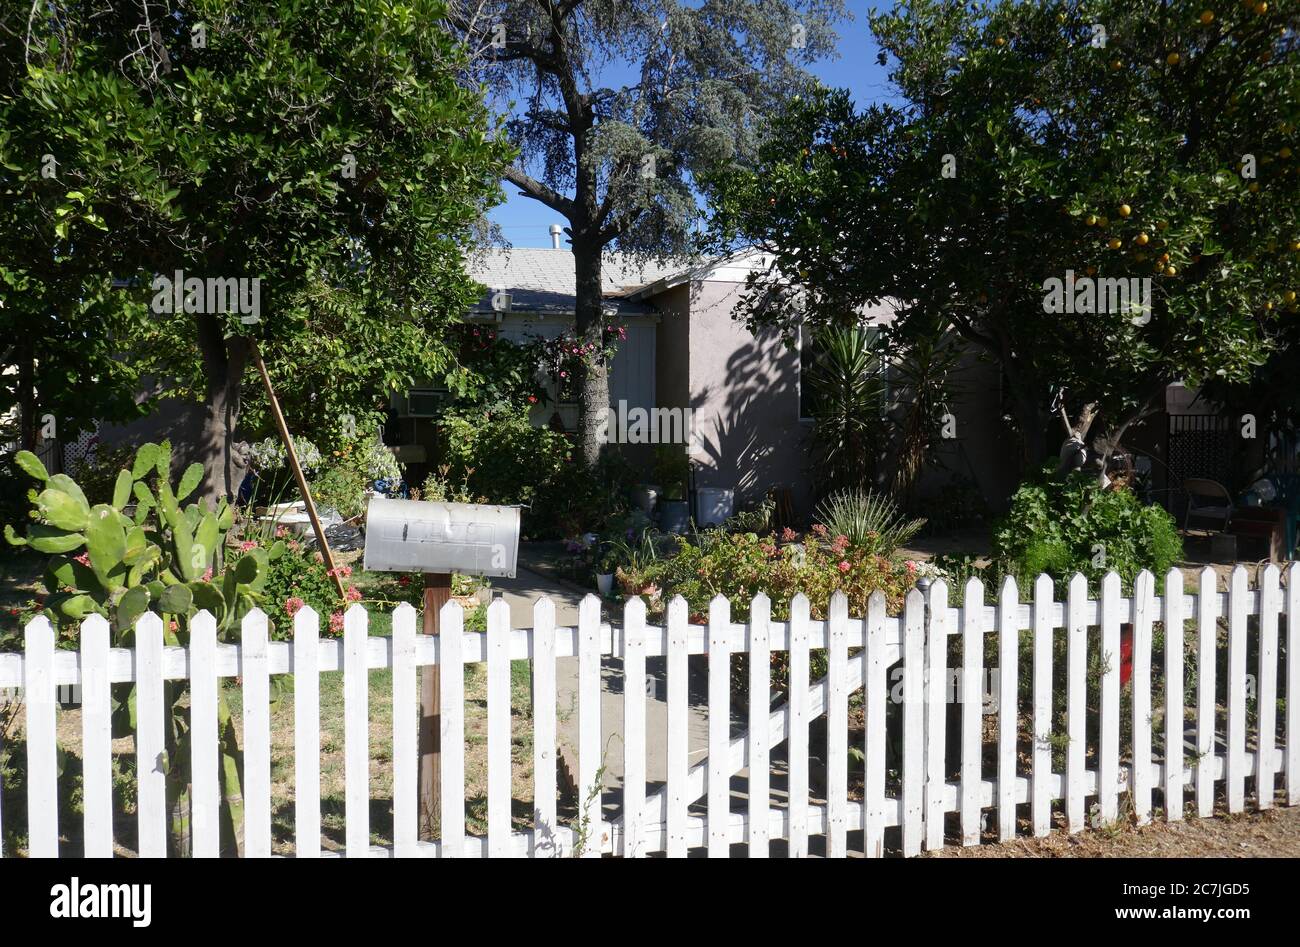 Pacoima, California, USA 17th July 2020 A general view of atmosphere of Ritchie Valen's former home on July 17, 2020 at 13428 W. Remington Street in Pacoima, California, USA. Photo by Barry King/Alamy Stock Photo Stock Photo